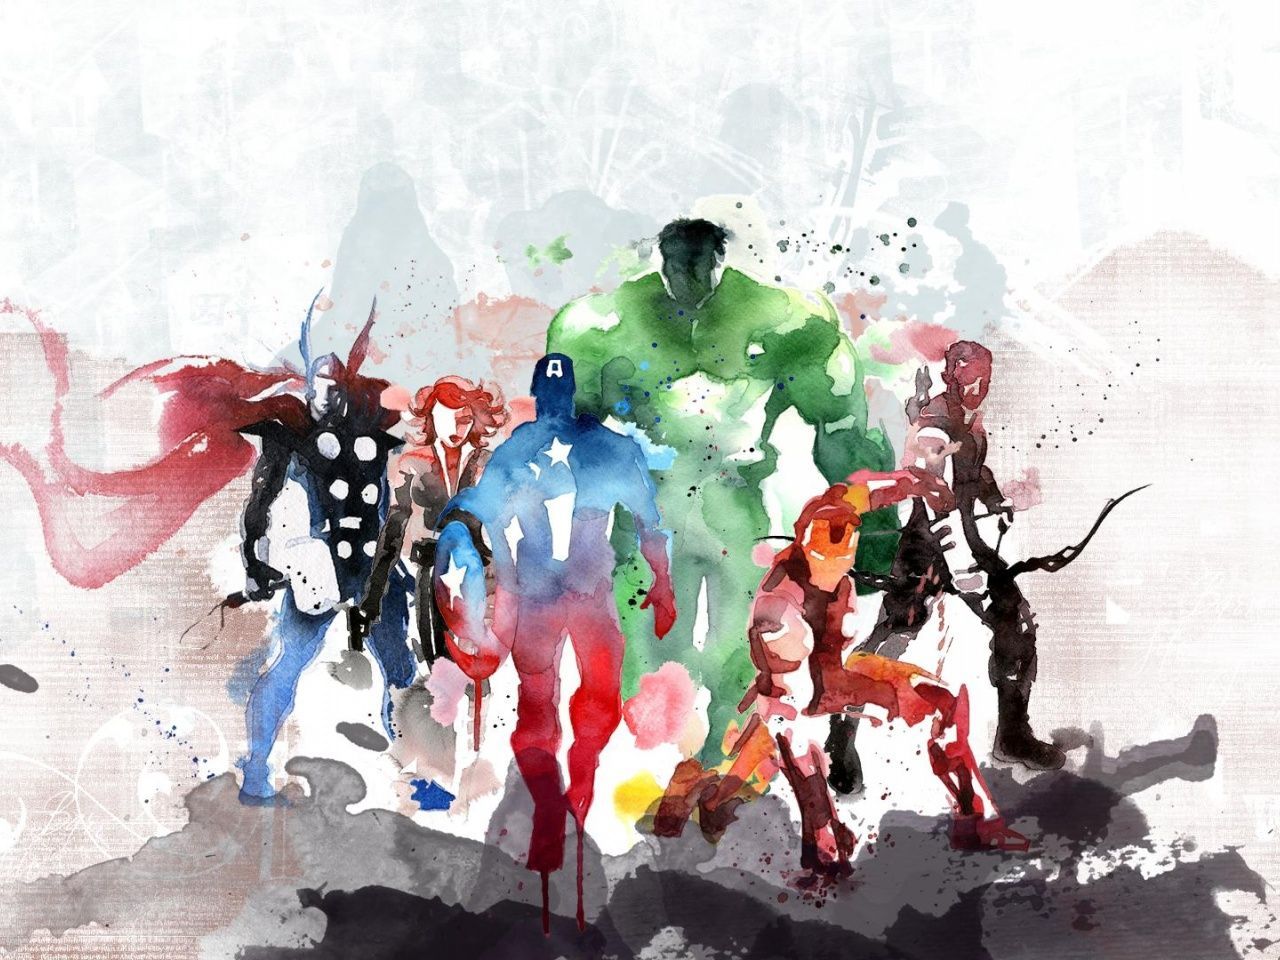 The Avengers Watercolor Painting. Avengers painting, Avengers drawings, Avengers wallpaper